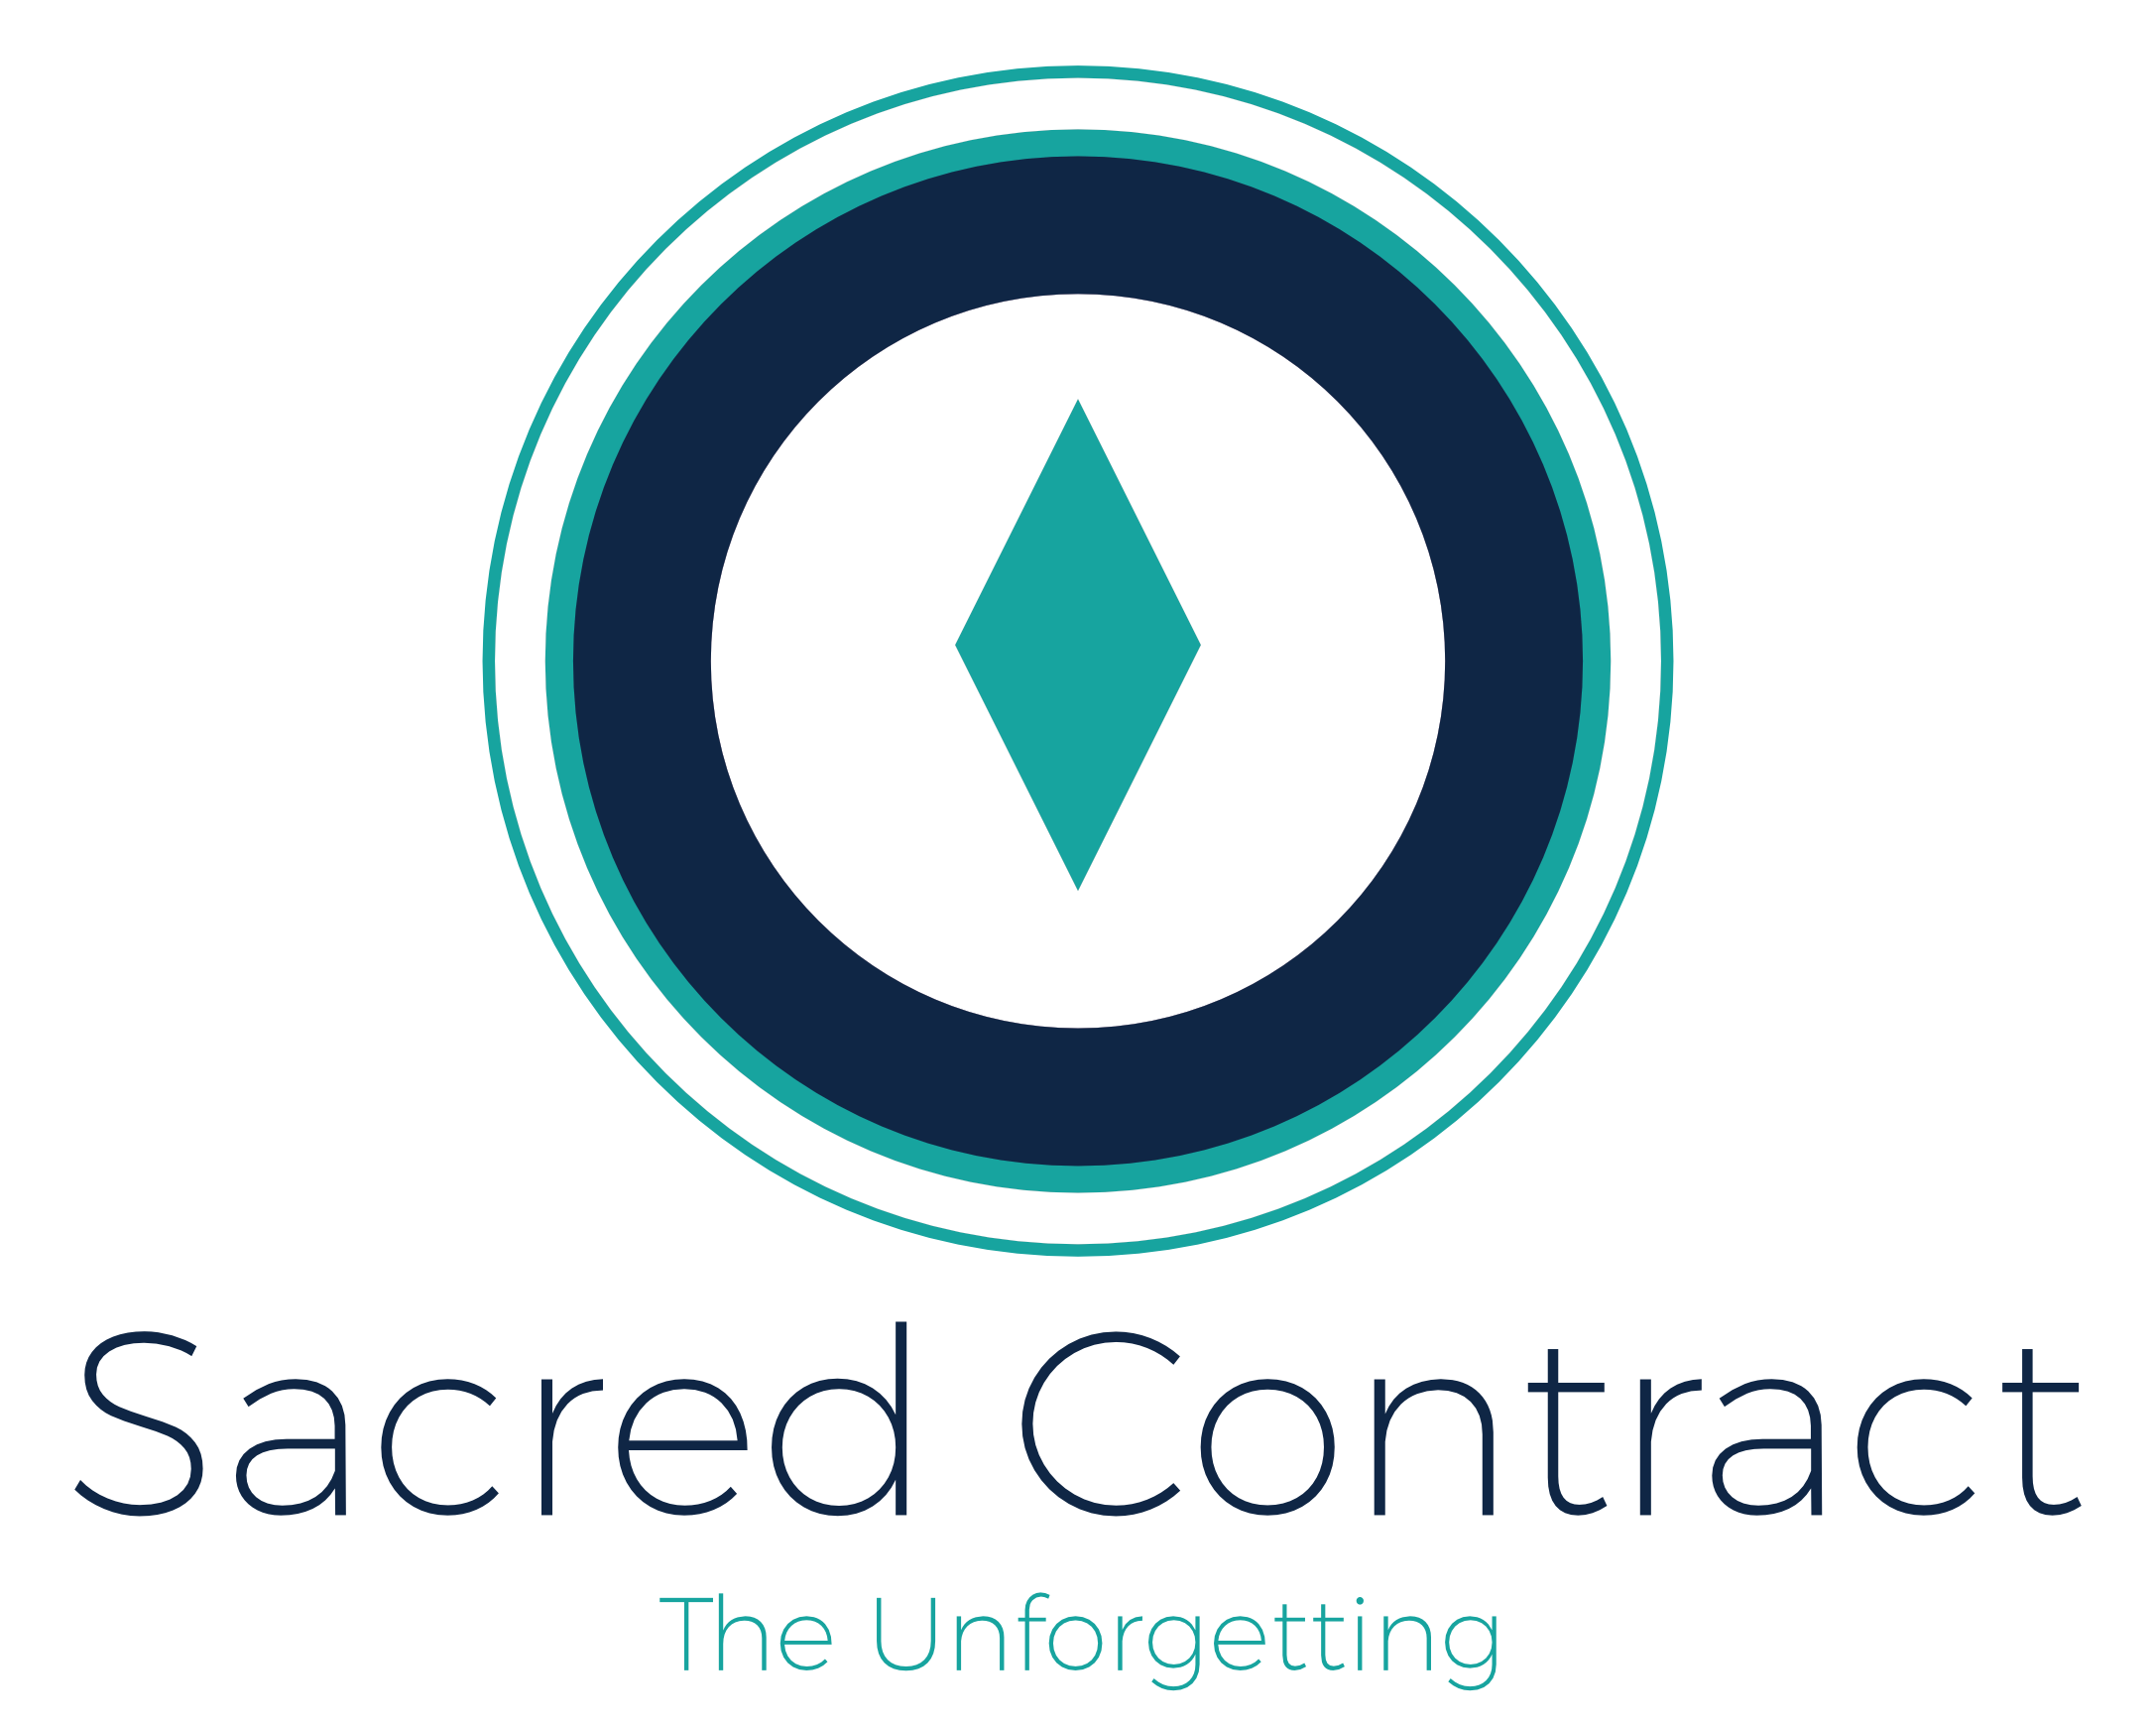 Sacred Contract Retrieval - The Unforgetting